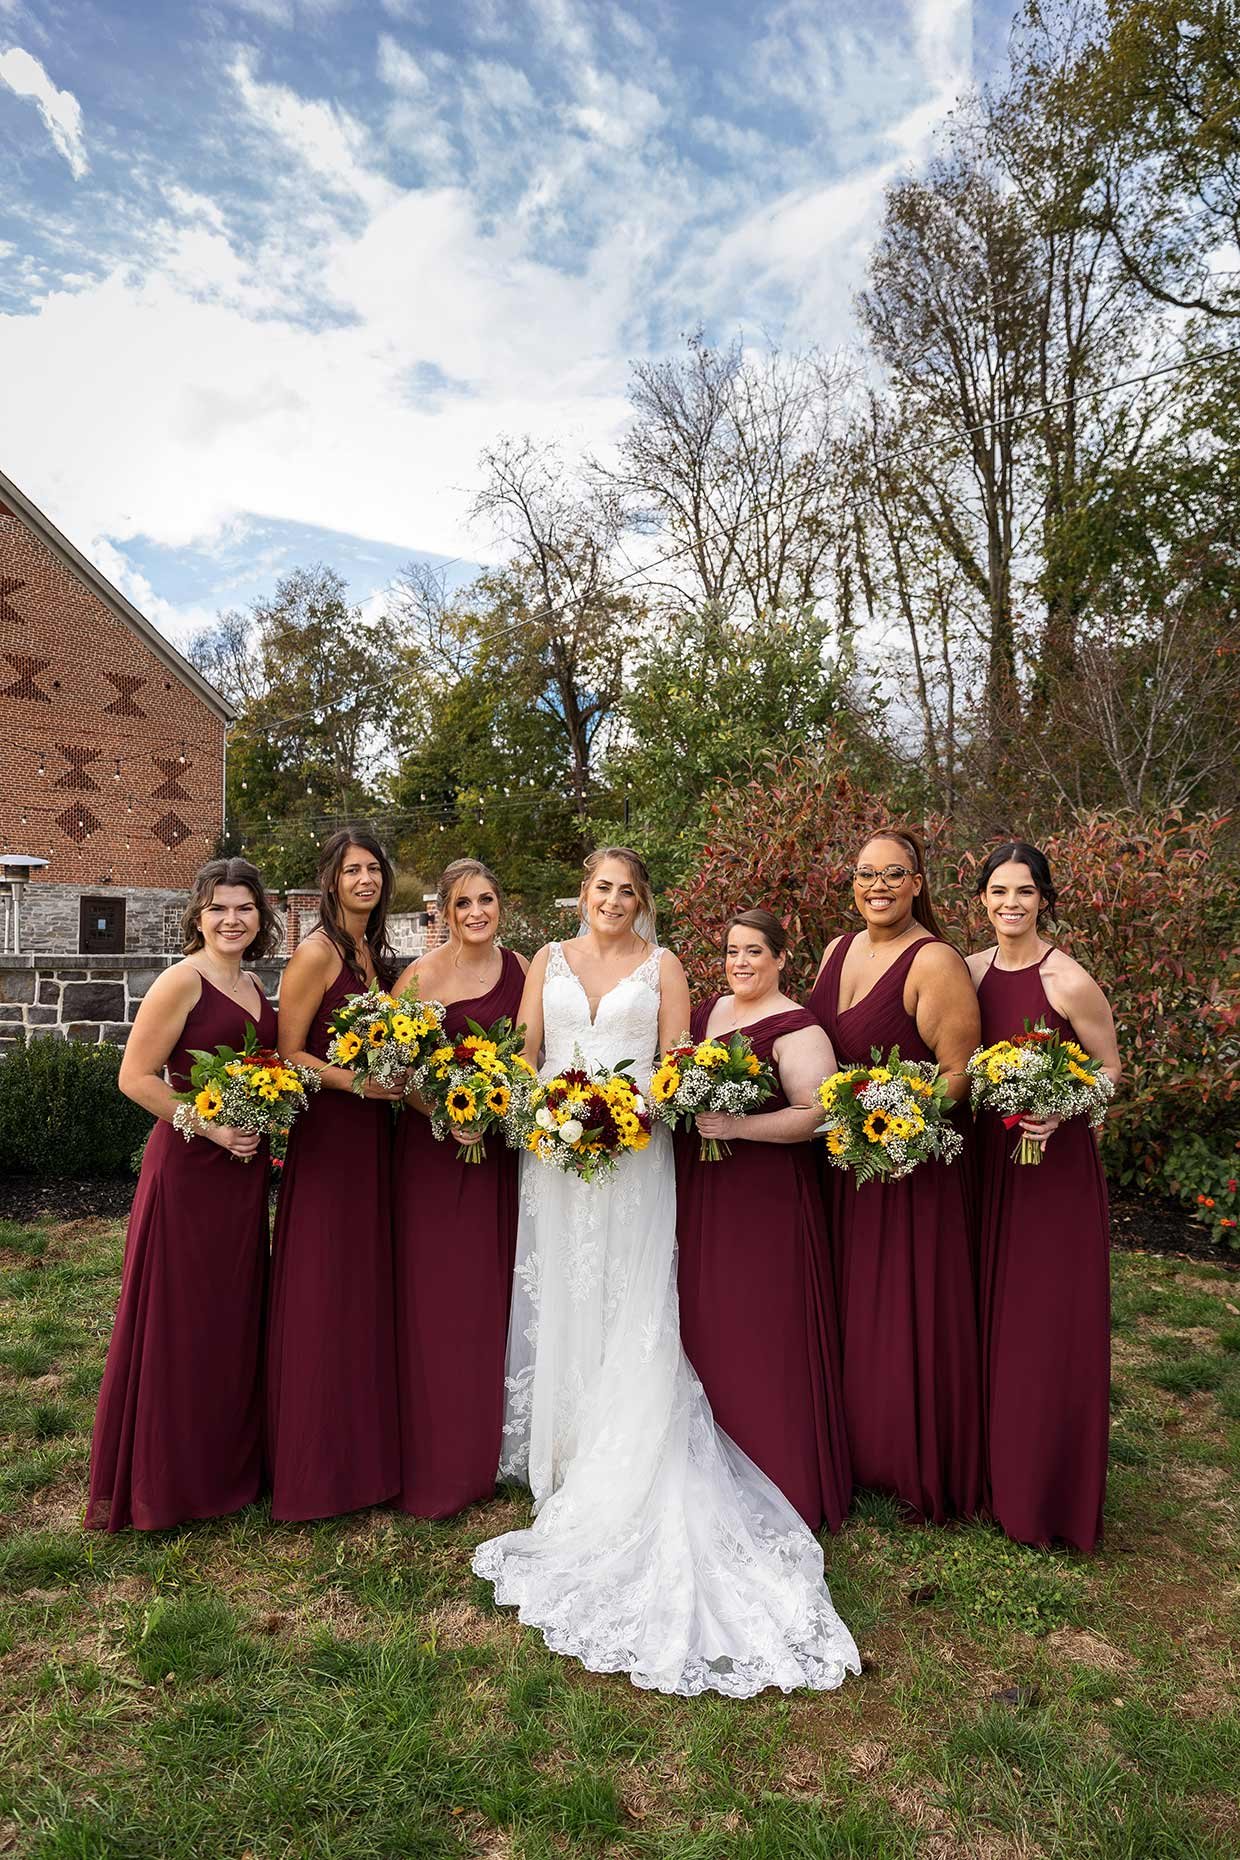 Bridesmaids in front of brick barn with blue sky